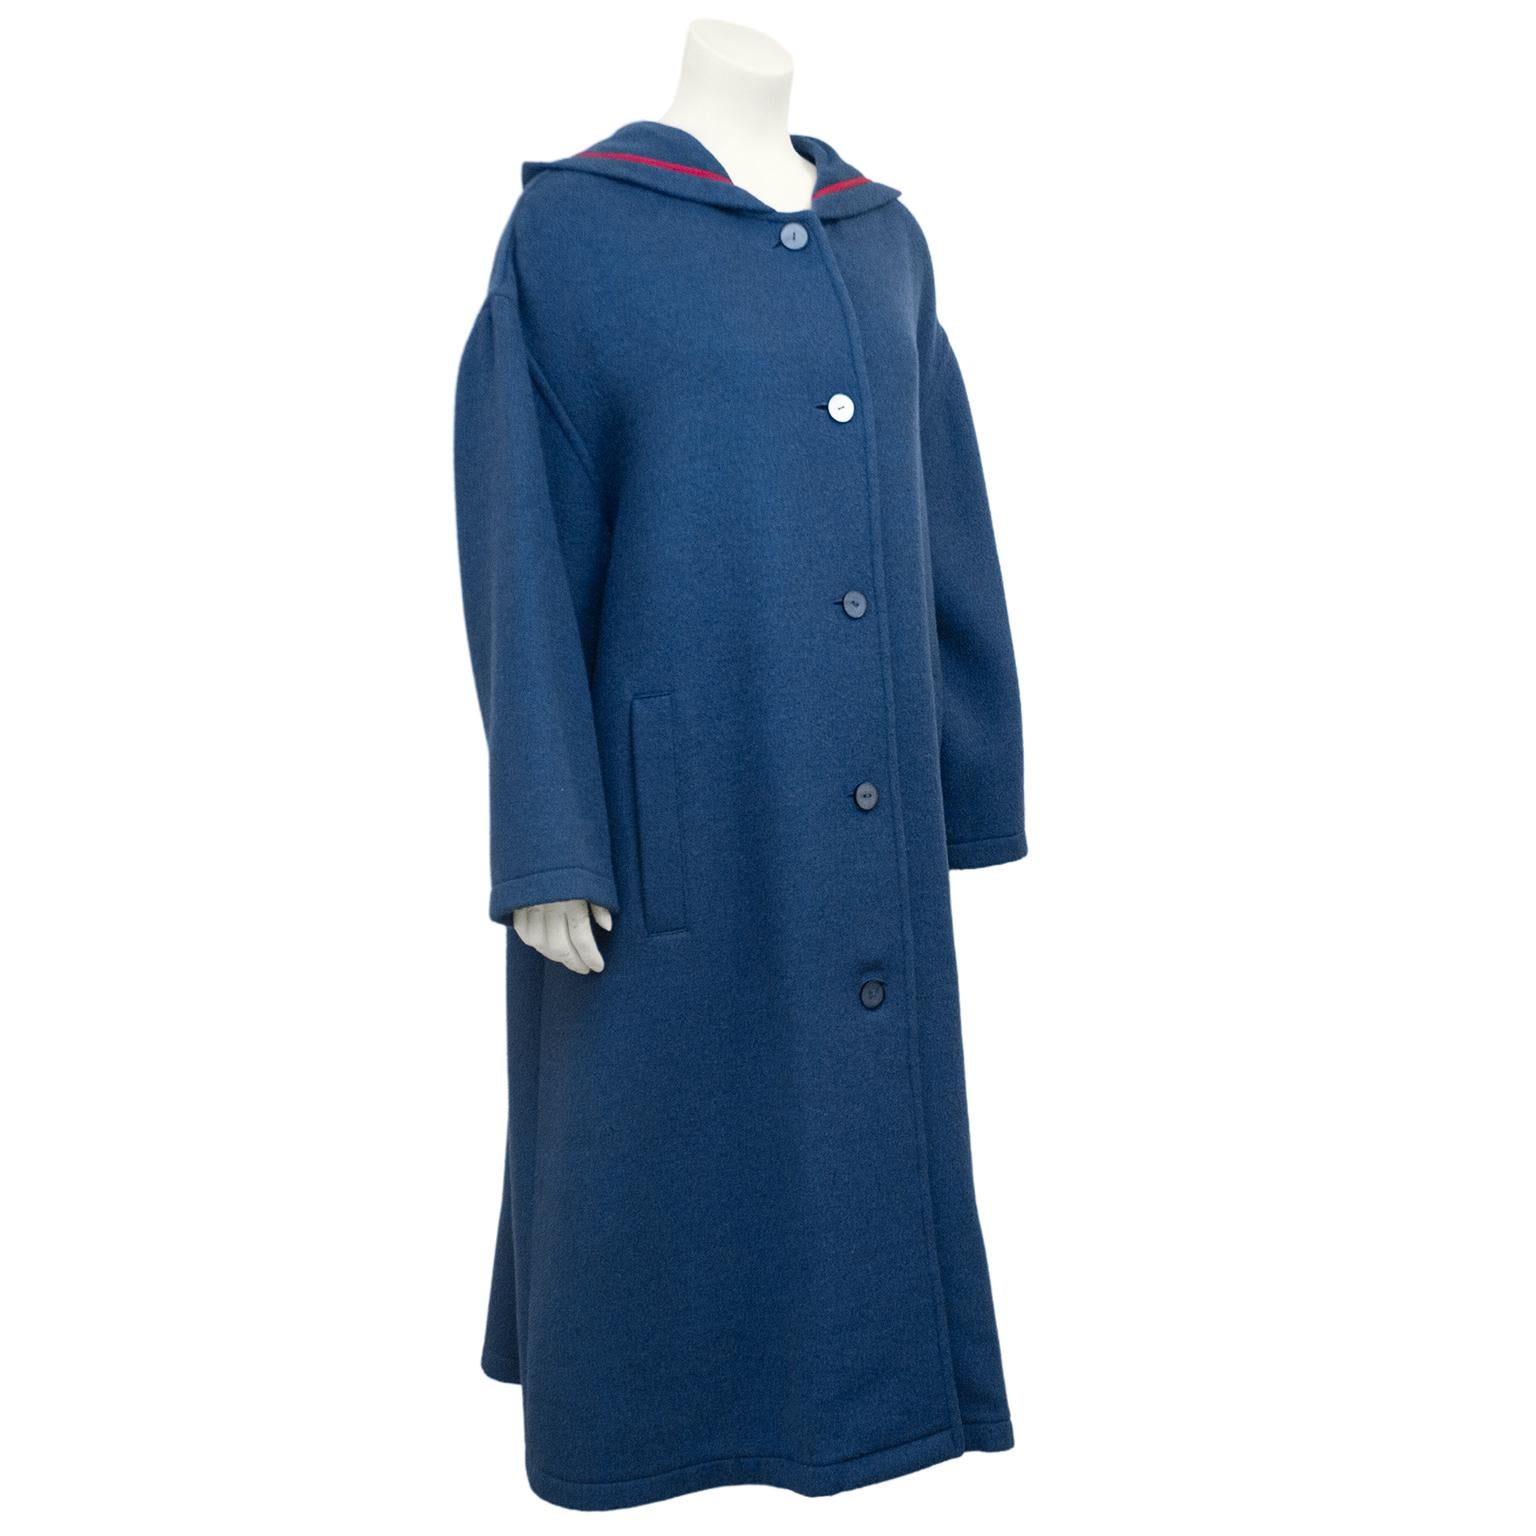 1980s Geoffrey Beene teal blue felted wool coat with rose pink trim. Dropped shoulder with slight dolman shaped sleeves and hood. Large single inverted pleat at centre back. Vertical slit pockets and matching blue plastic buttons. Unlined. Oversized